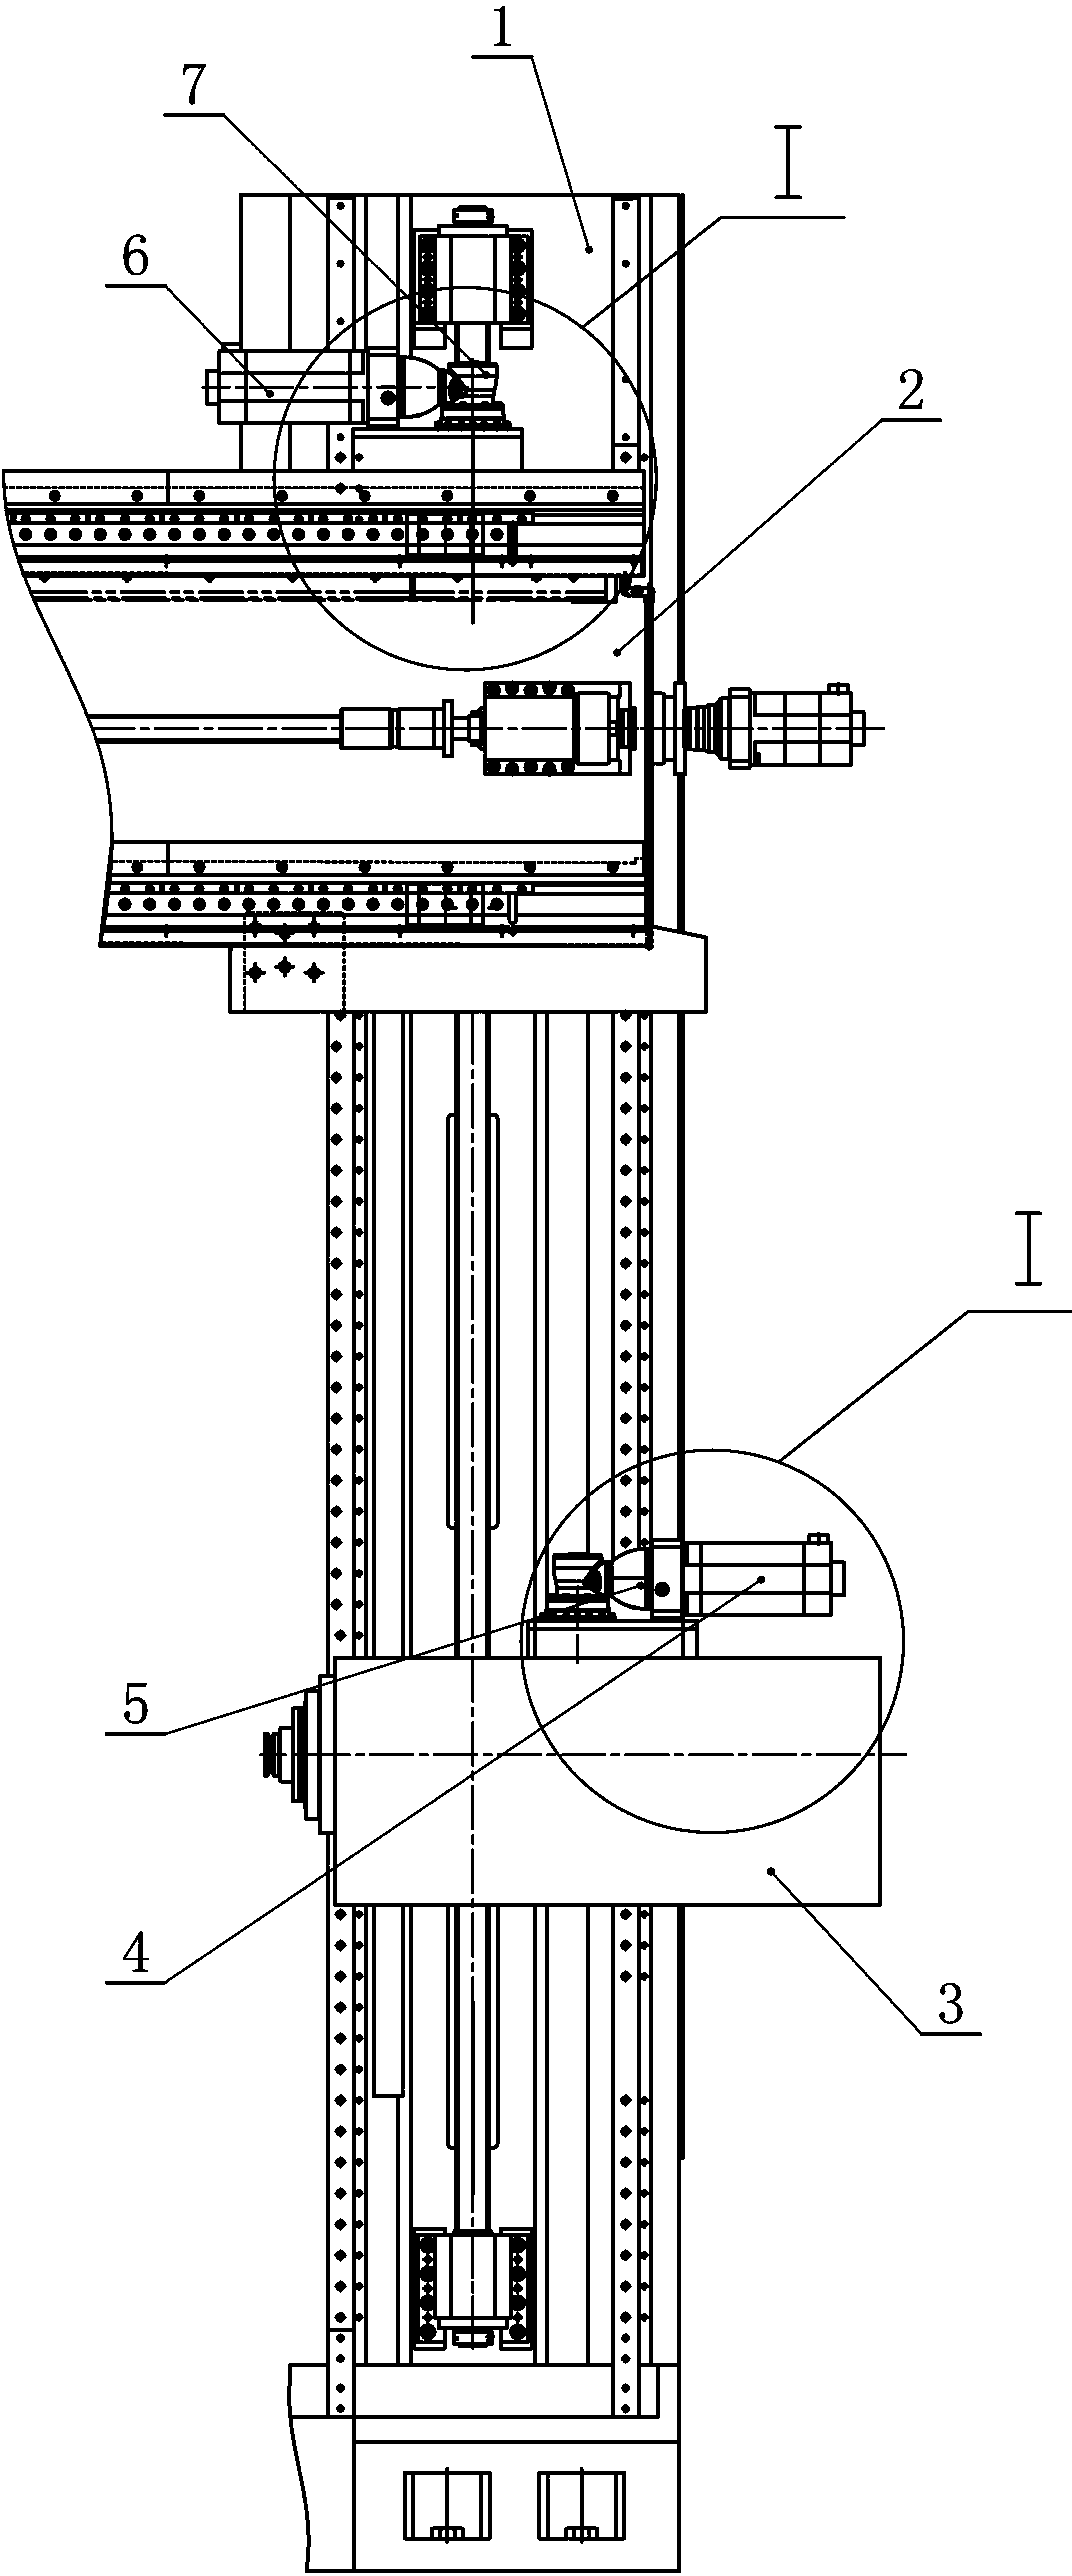 Guide rail and ball screw structure for lifting of both cross beam and horizontal boring and milling heads at two sides